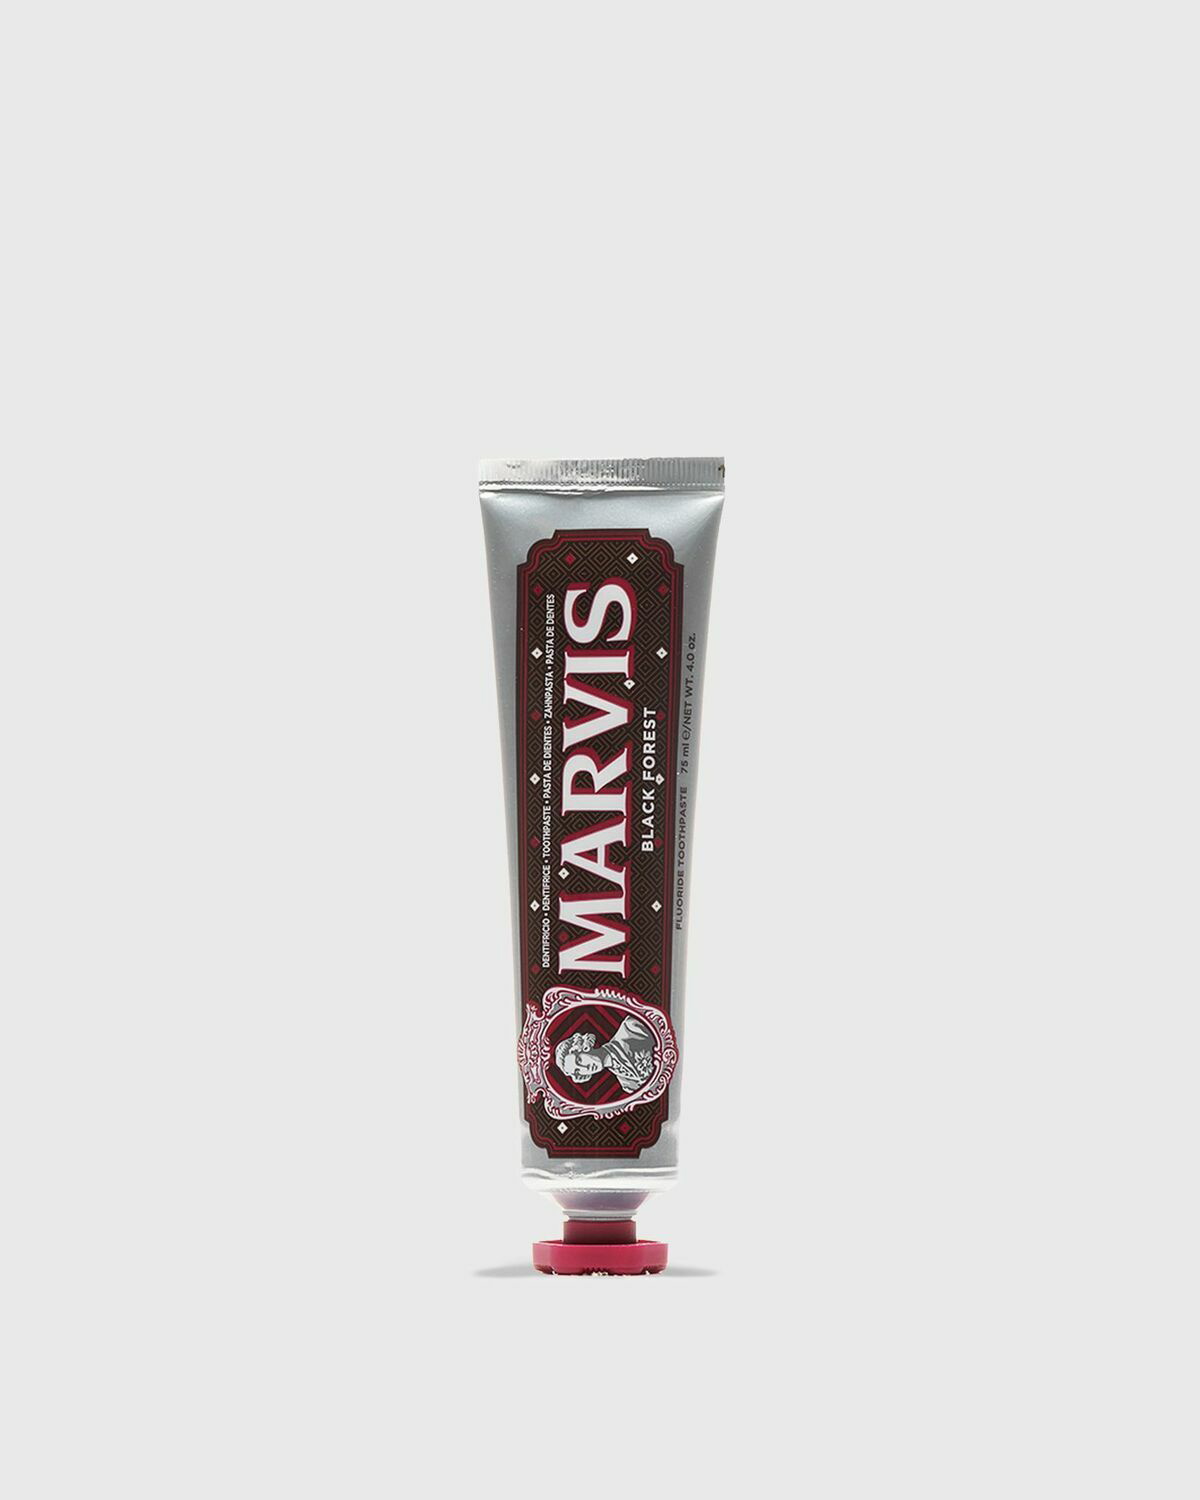 Marvis Sensitive Gums Gentle Mint Toothpaste (75ml), Free Shipping